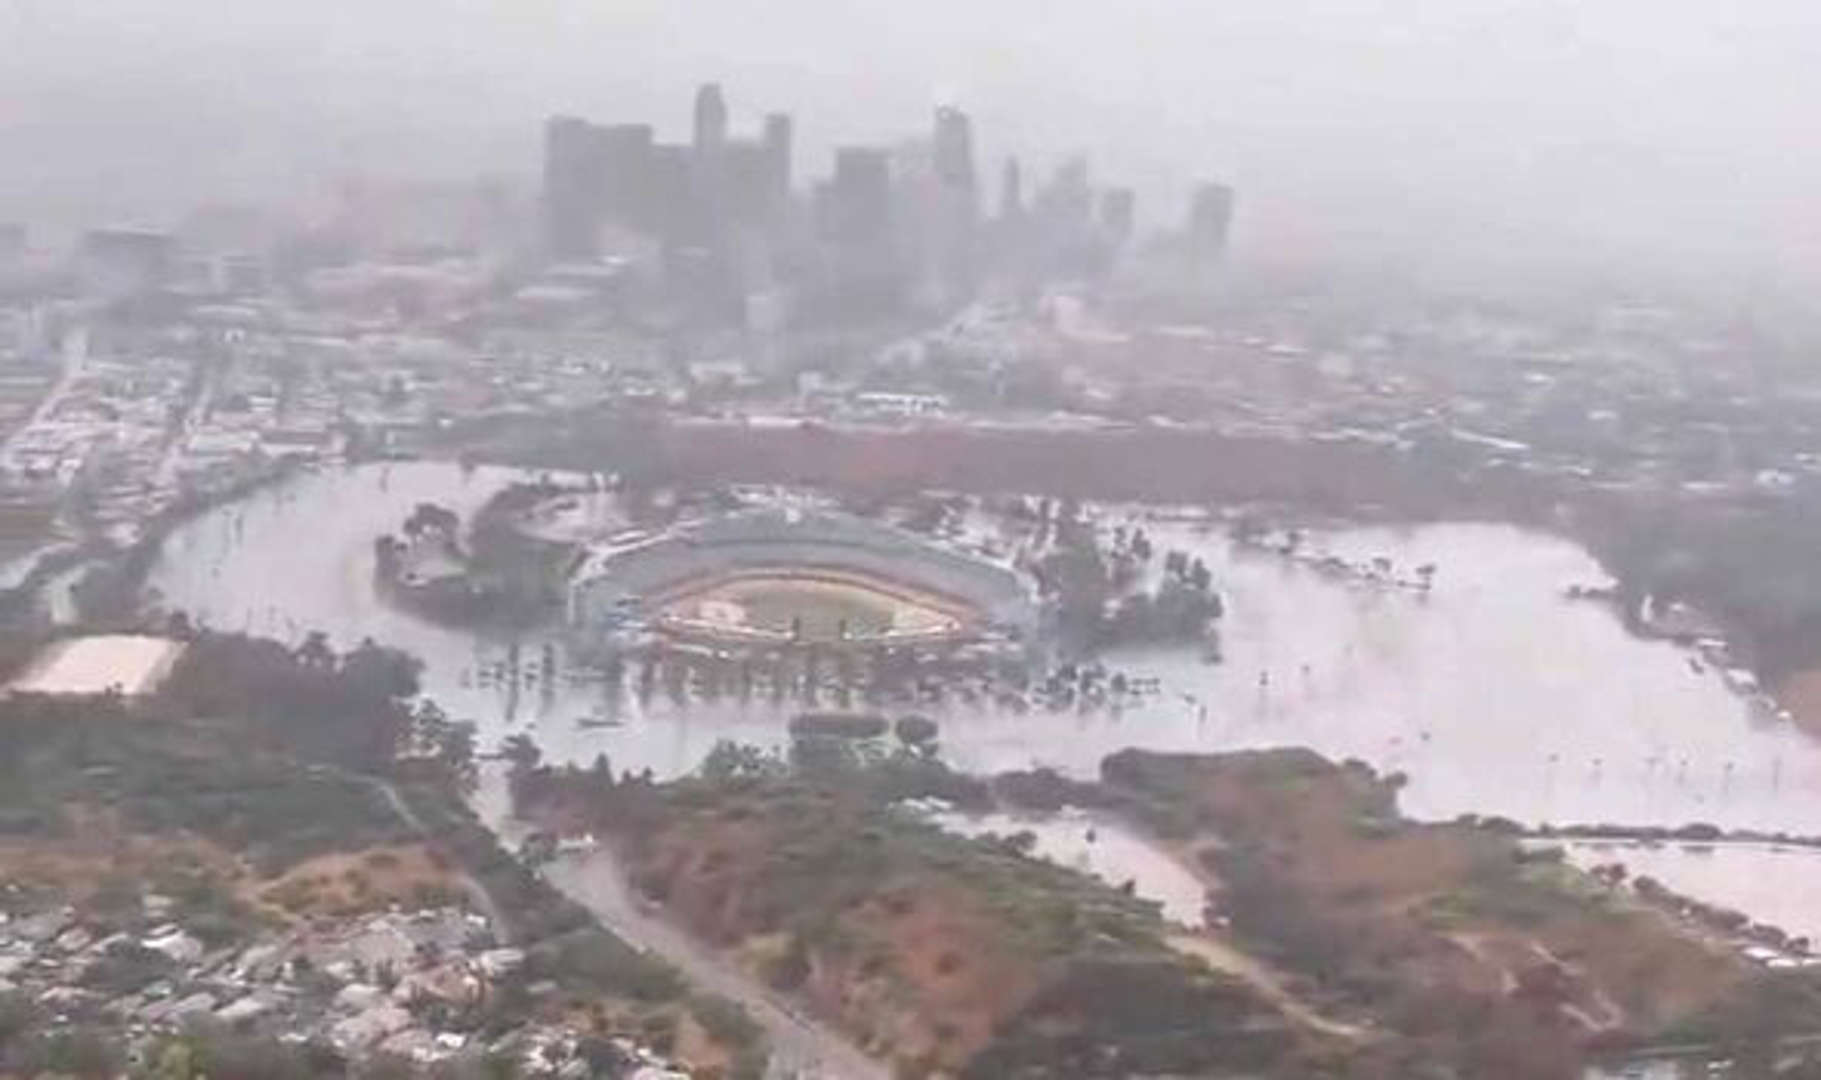 Dodger Stadium has been turned into an island by the post-tropical cyclone.